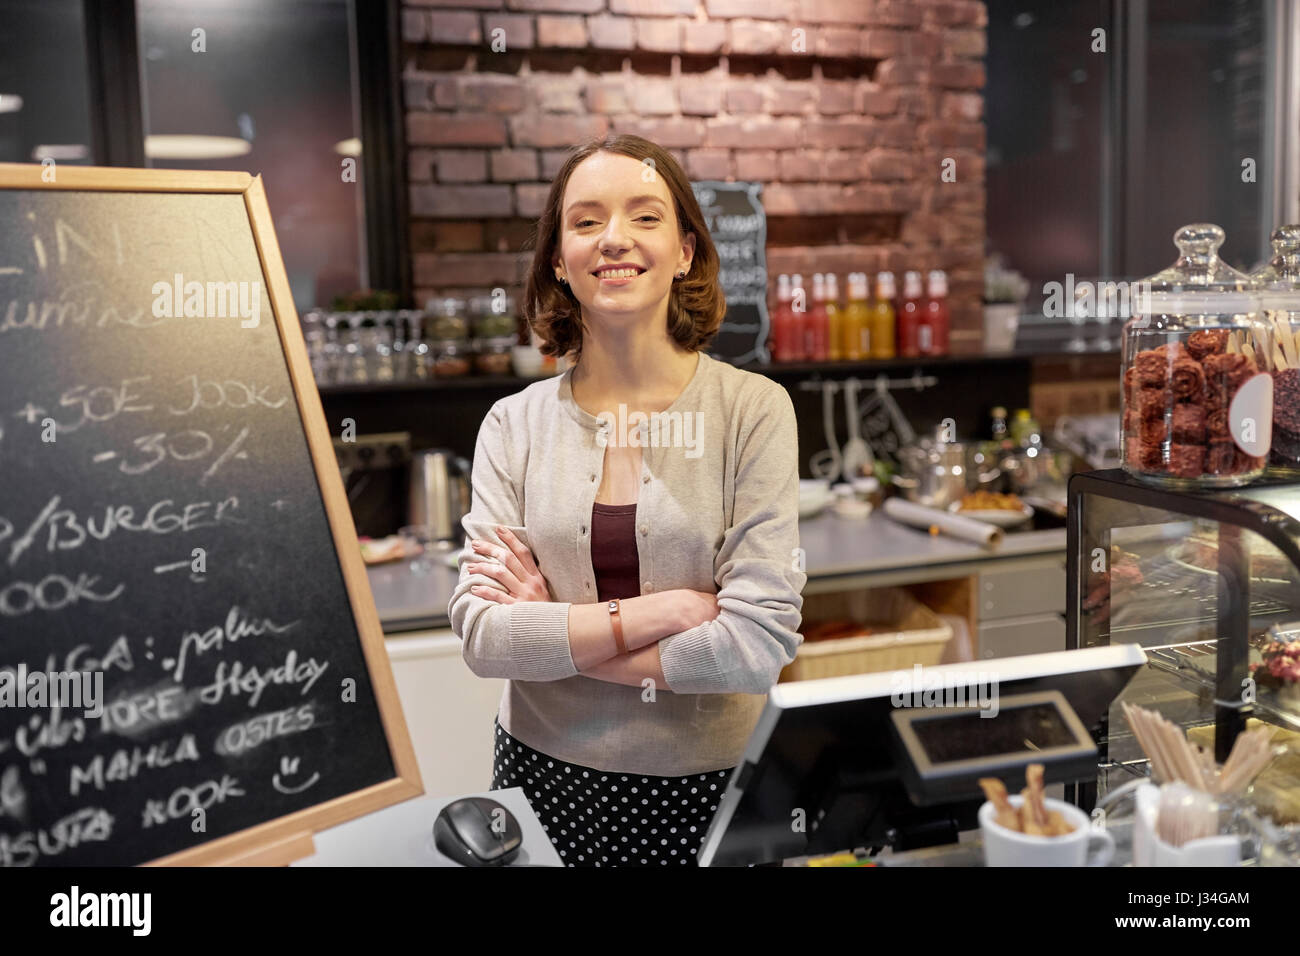 happy woman or barmaid at cafe counter Stock Photo